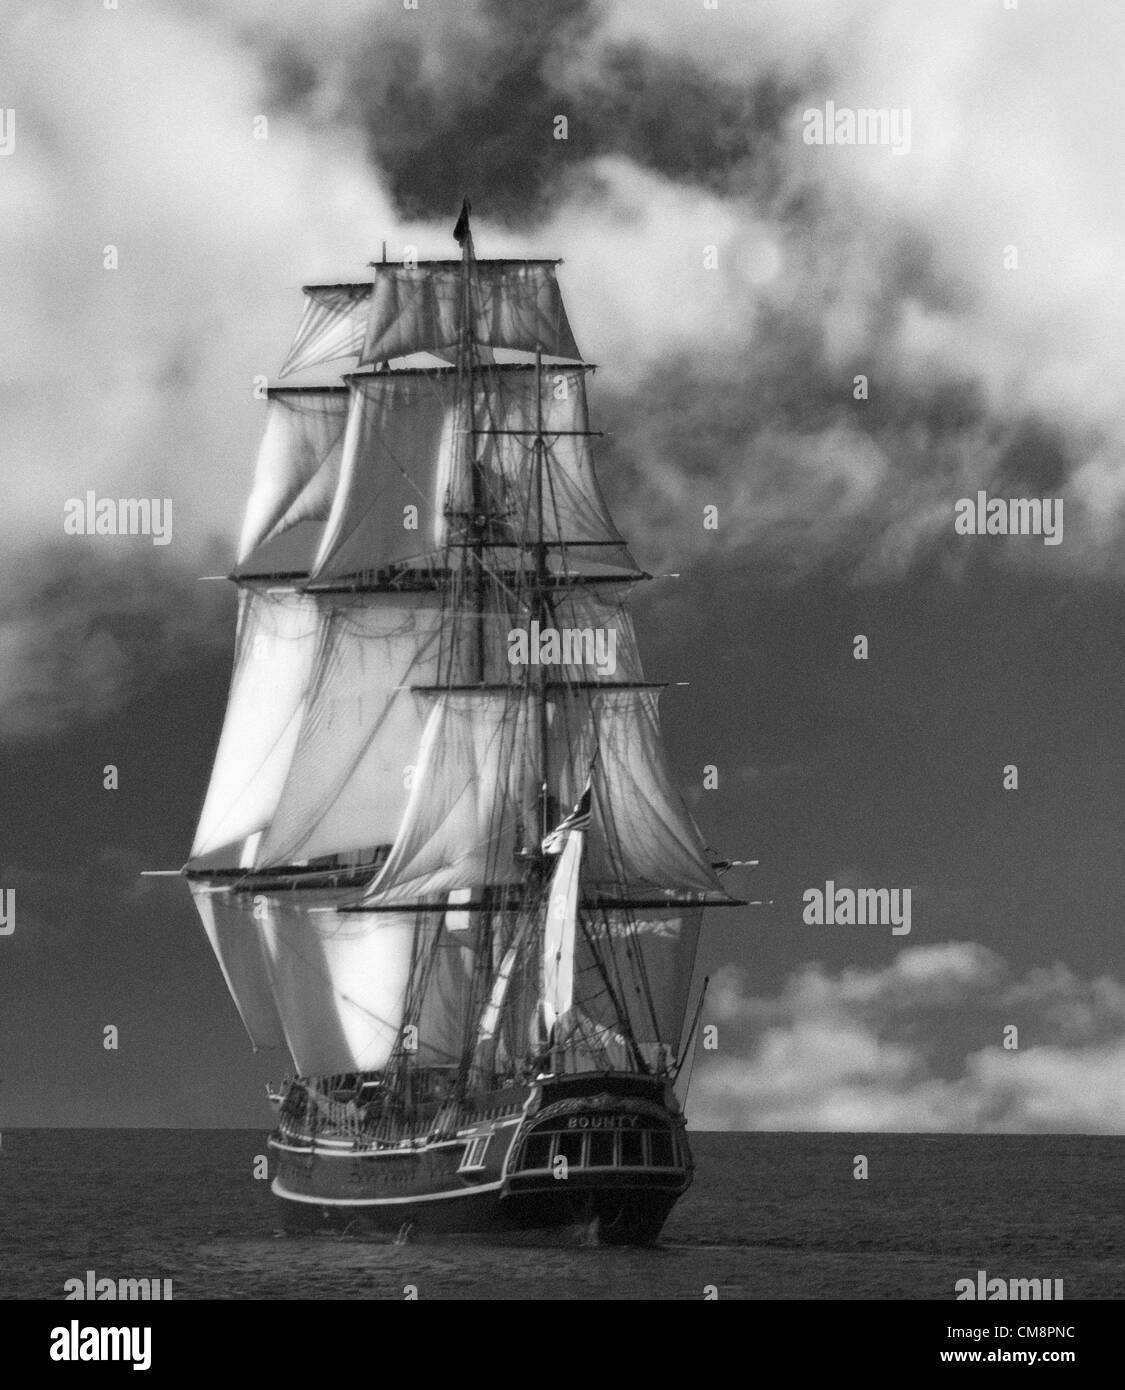 Aug. 24, 2010 - Chicago, Illinois, U.S. - FILE - The HMS Bounty, 180 foot tall ship sank off the coast of North Carolina about 90 miles southeast of Hatteras. 14 crew members were rescued and 2 are missing. The U.S. Coast Guard rescued the 14 who were in two life rafts. The HMS Bounty was built as a replica of the original British transport ship for the 1962 movie, 'Mutiny on the Bounty' and 'Pirates of the Carribbean Deadman's Chest.'  PICTURED:  August 24, 2012 - Tall Ships Parade Chicago. (Credit Image: © Karen I. Hirsch/ZUMAPRESS.com) Stock Photo